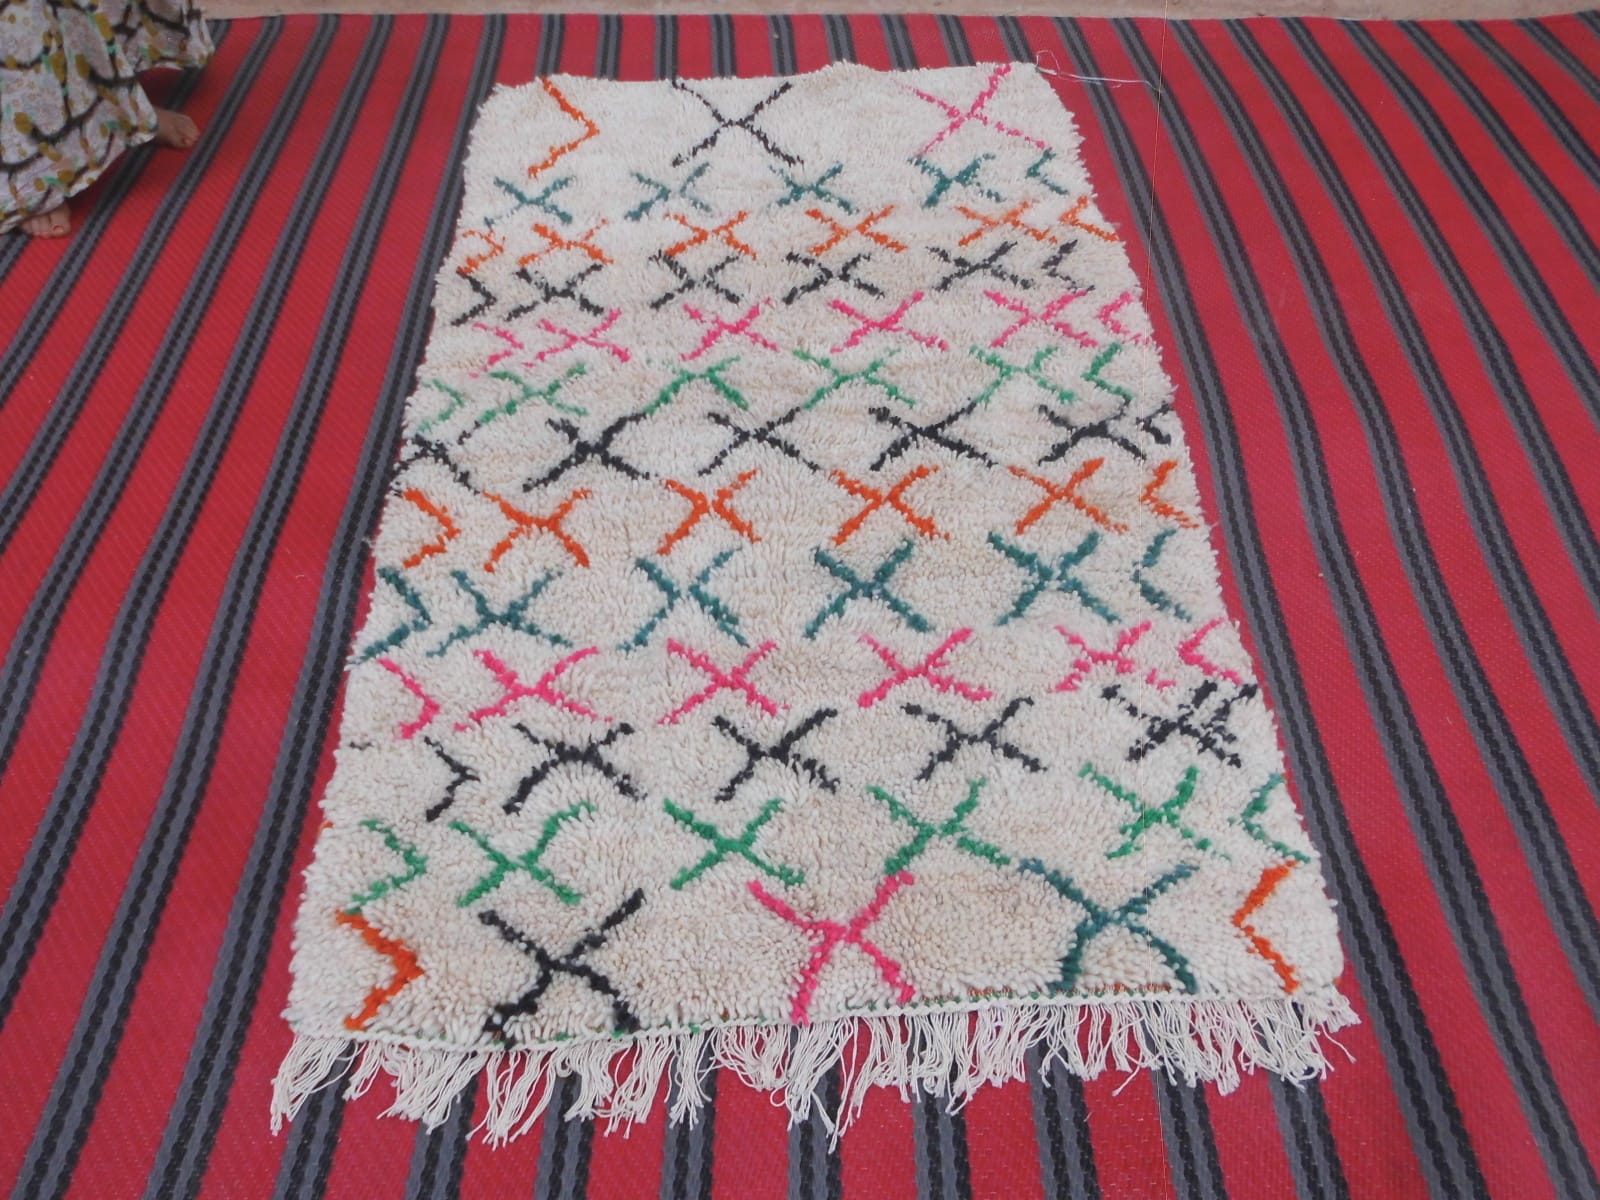  Pile Knot Rug Cotton String Colored Morocco